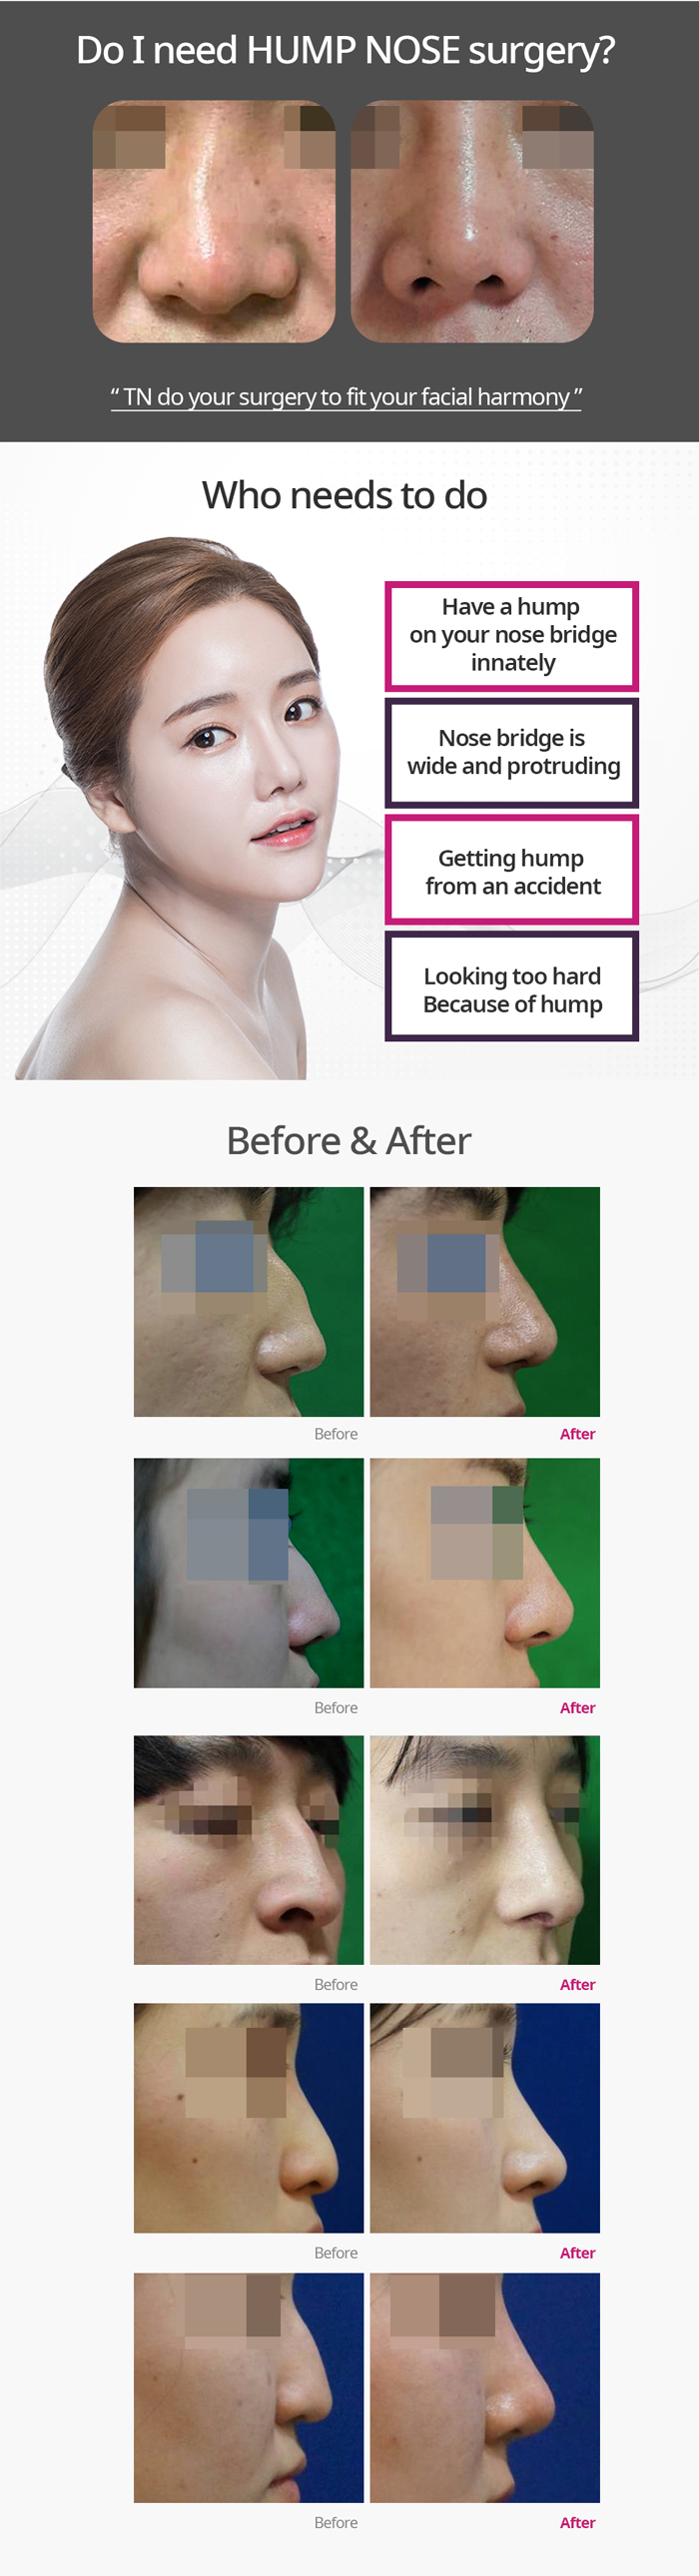 TN x AllaboutMEI special offer / hump nose surgery with the lowest price in AllaboutMEI